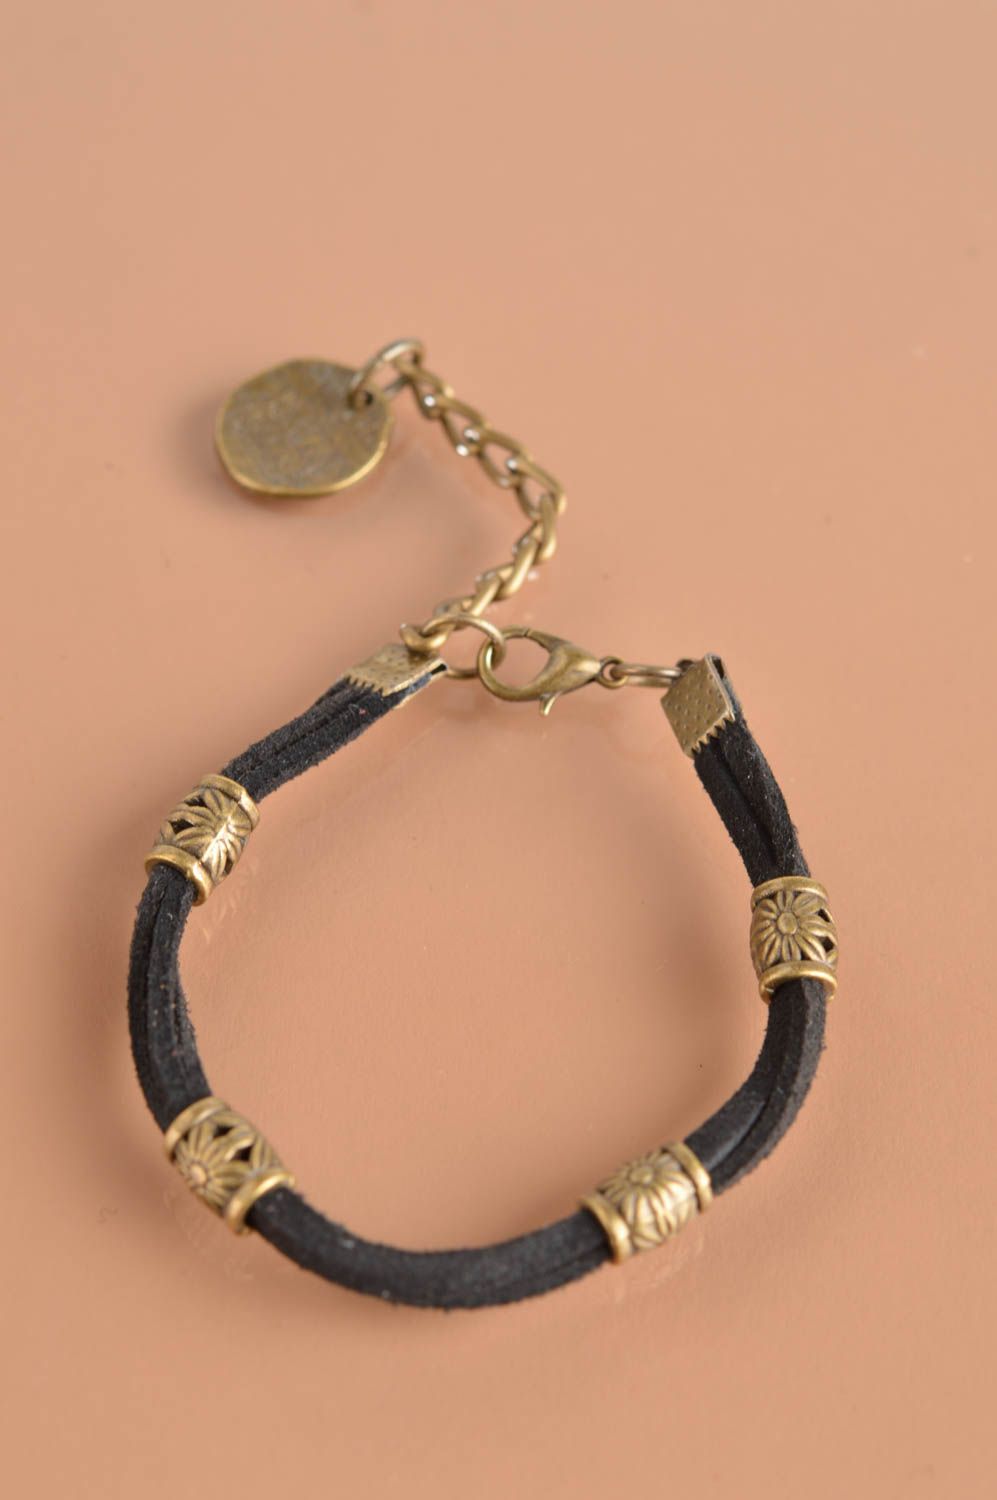 Handmade stylish black with metal cute bracelet made of chamois leather lace  photo 5